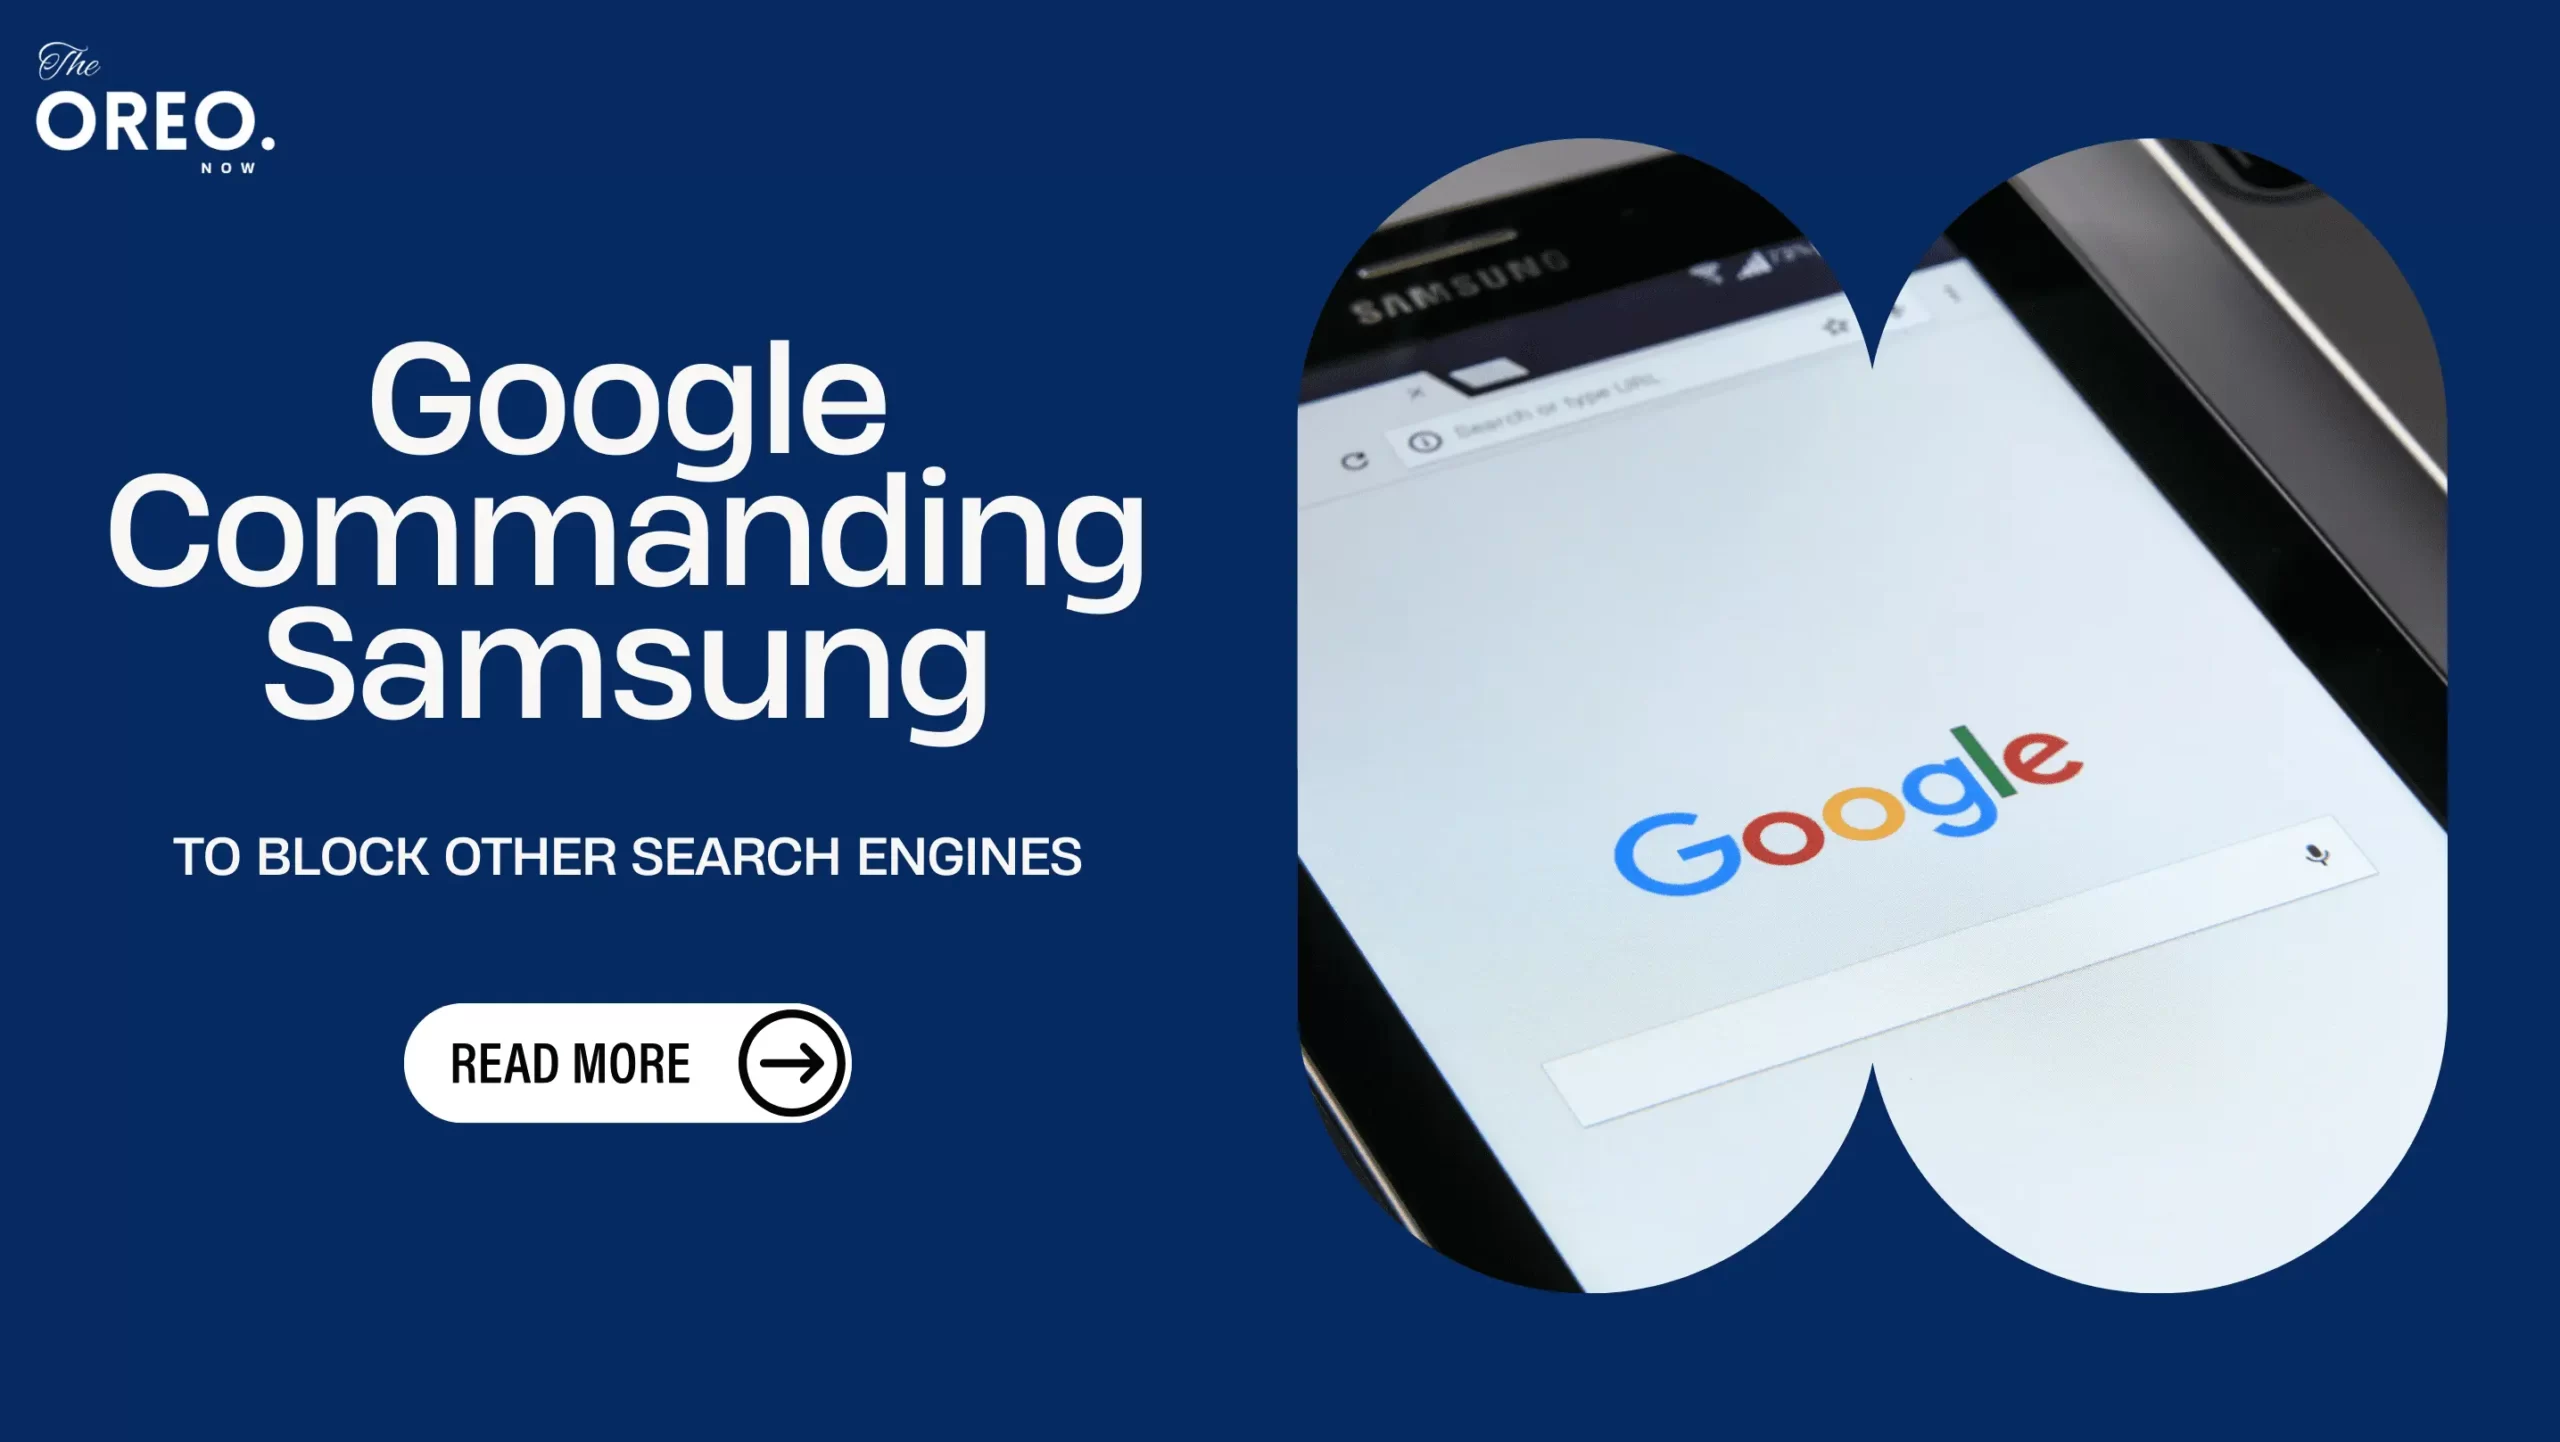 Did Google pressure Samsung to Block other Search Engines